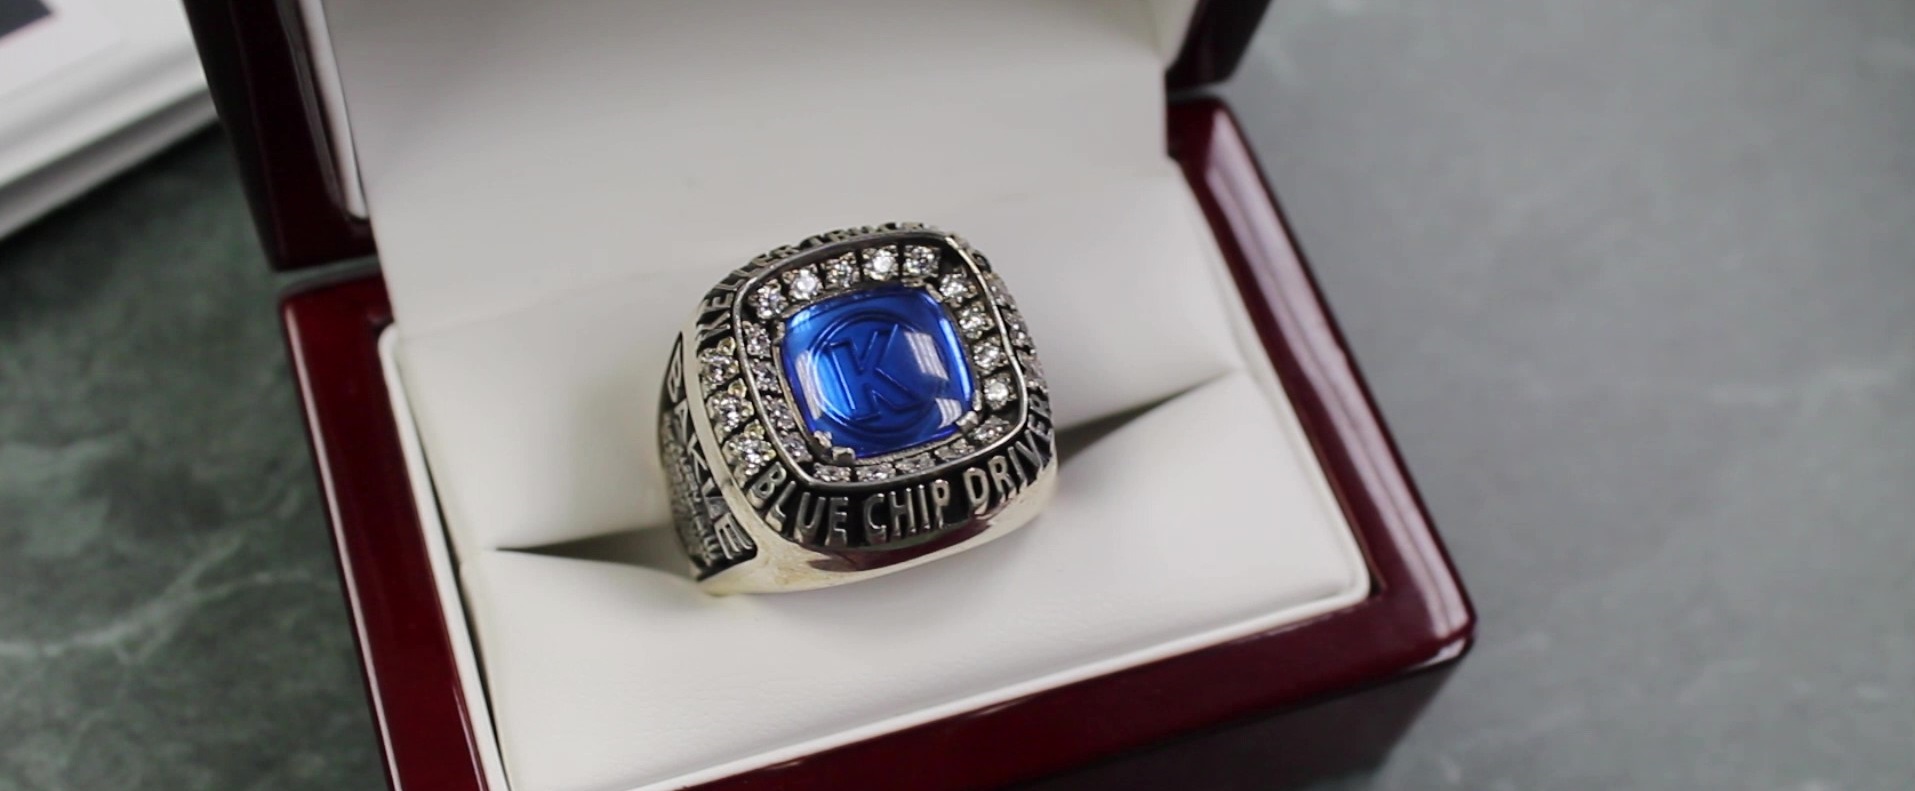 Blue Chip Completion Ring